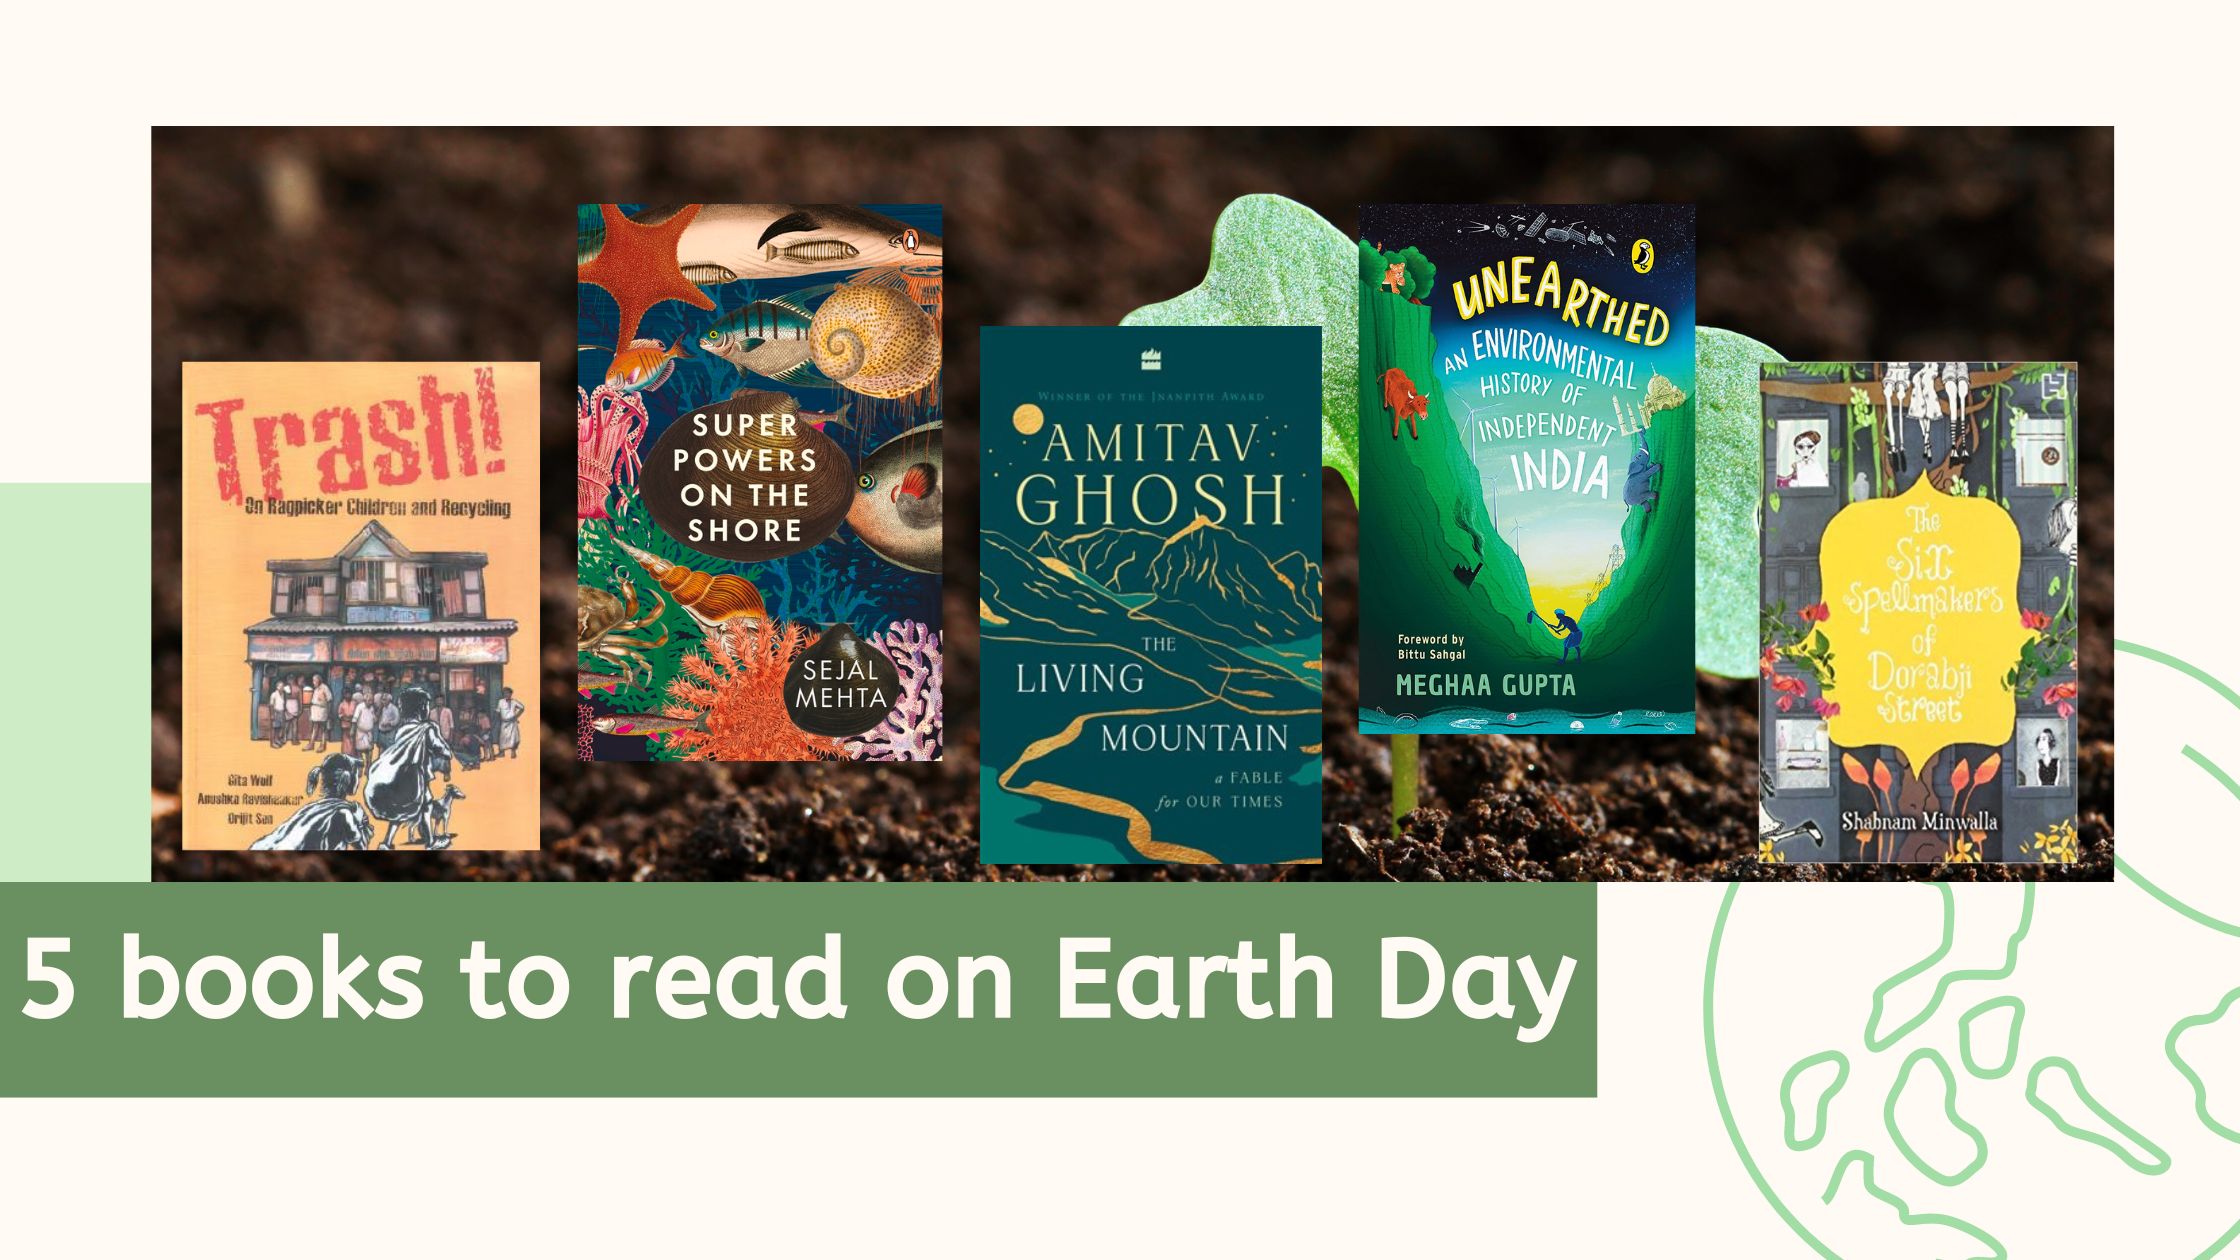 5 books to read on Earth Day